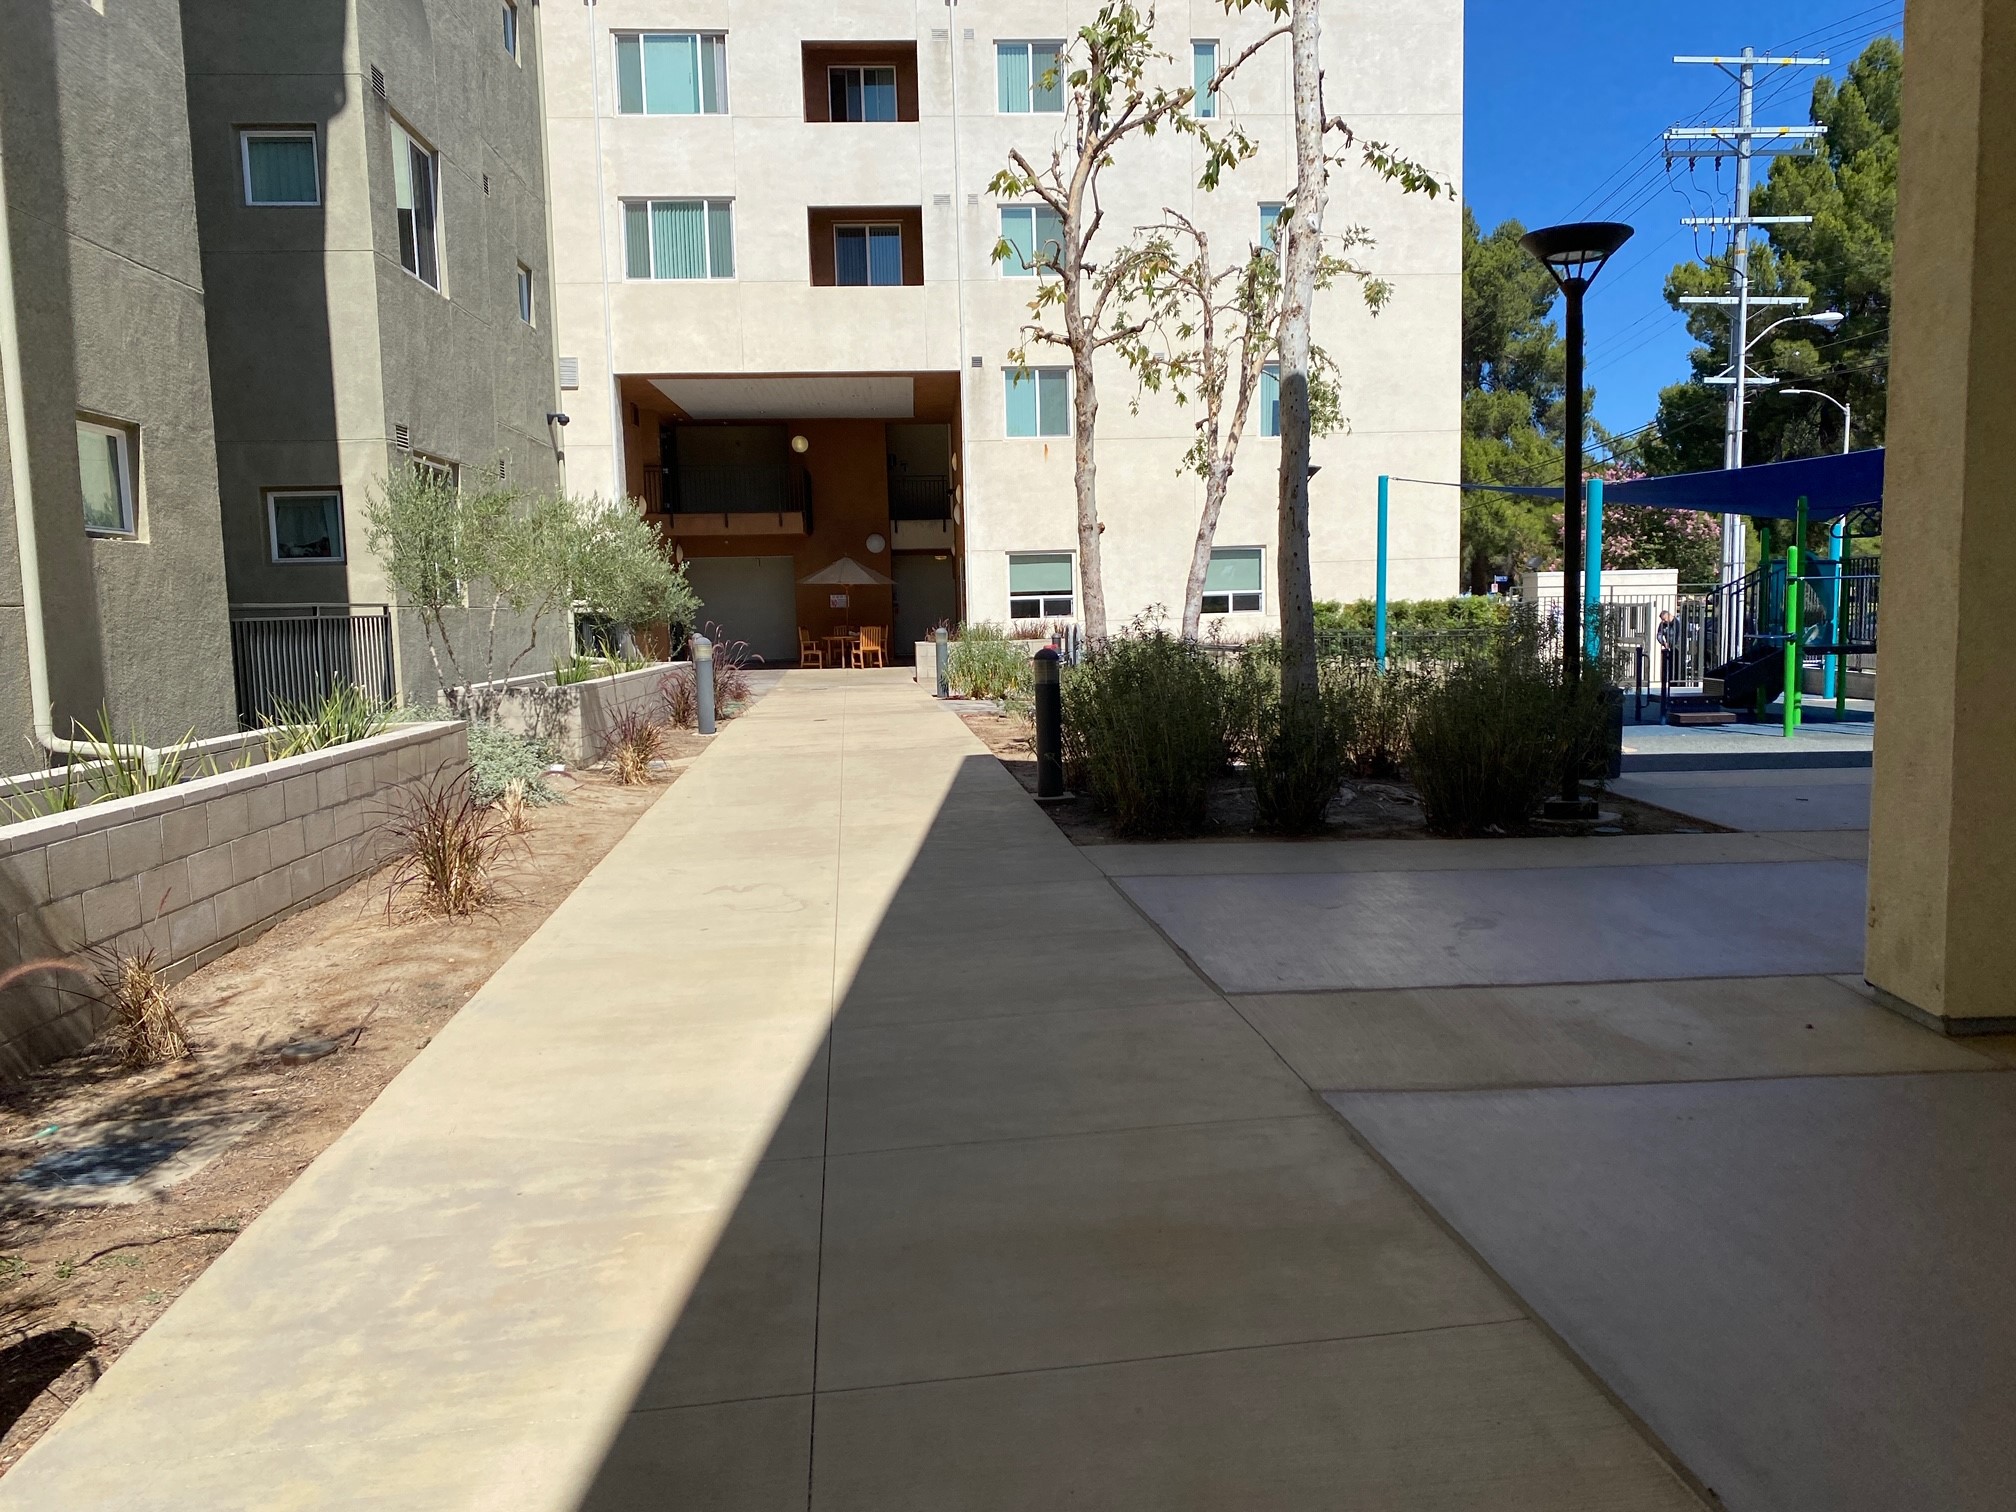 Riverwalk apartments walkway. wide walkway leading down the building and playground area.